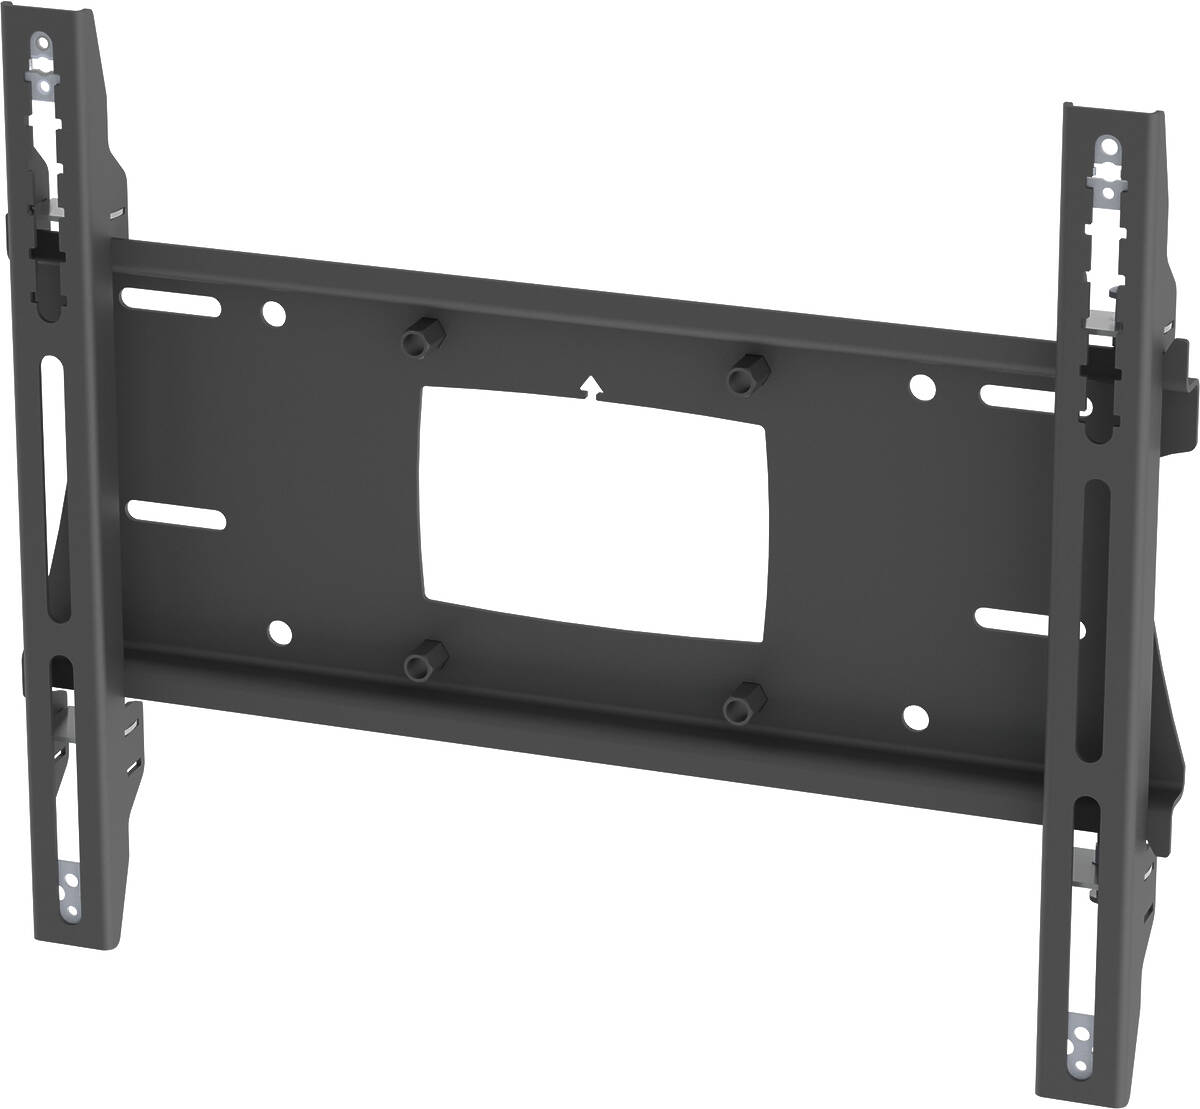 Unicol PZX3 Pozimount VESA wall mount for monitors and TVs from 33 to 70 inches product image. Click to enlarge.